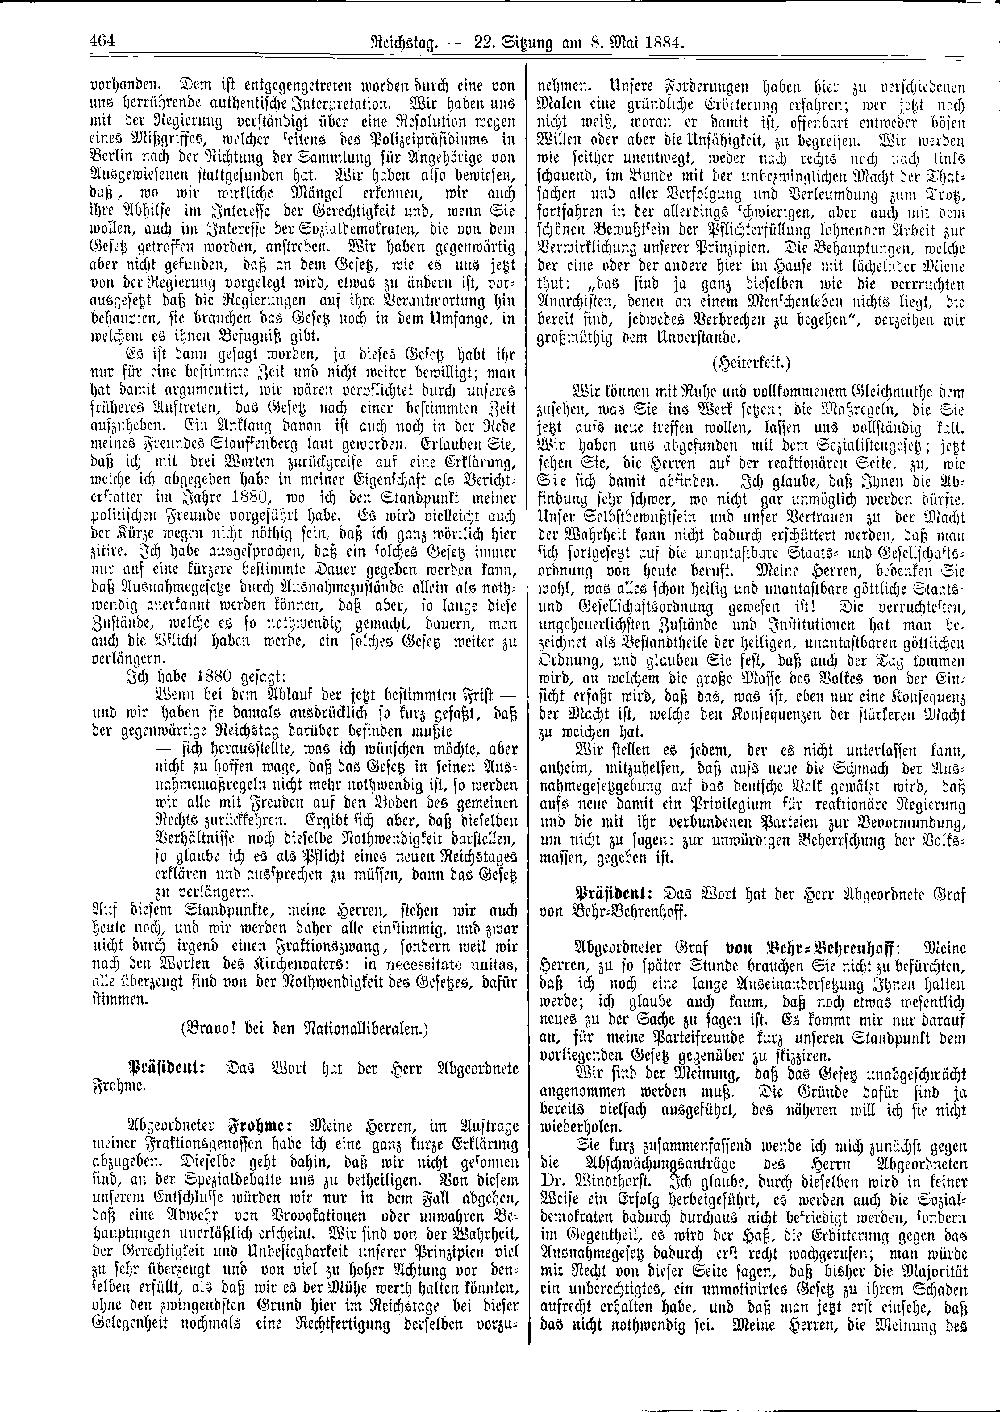 Scan of page 464